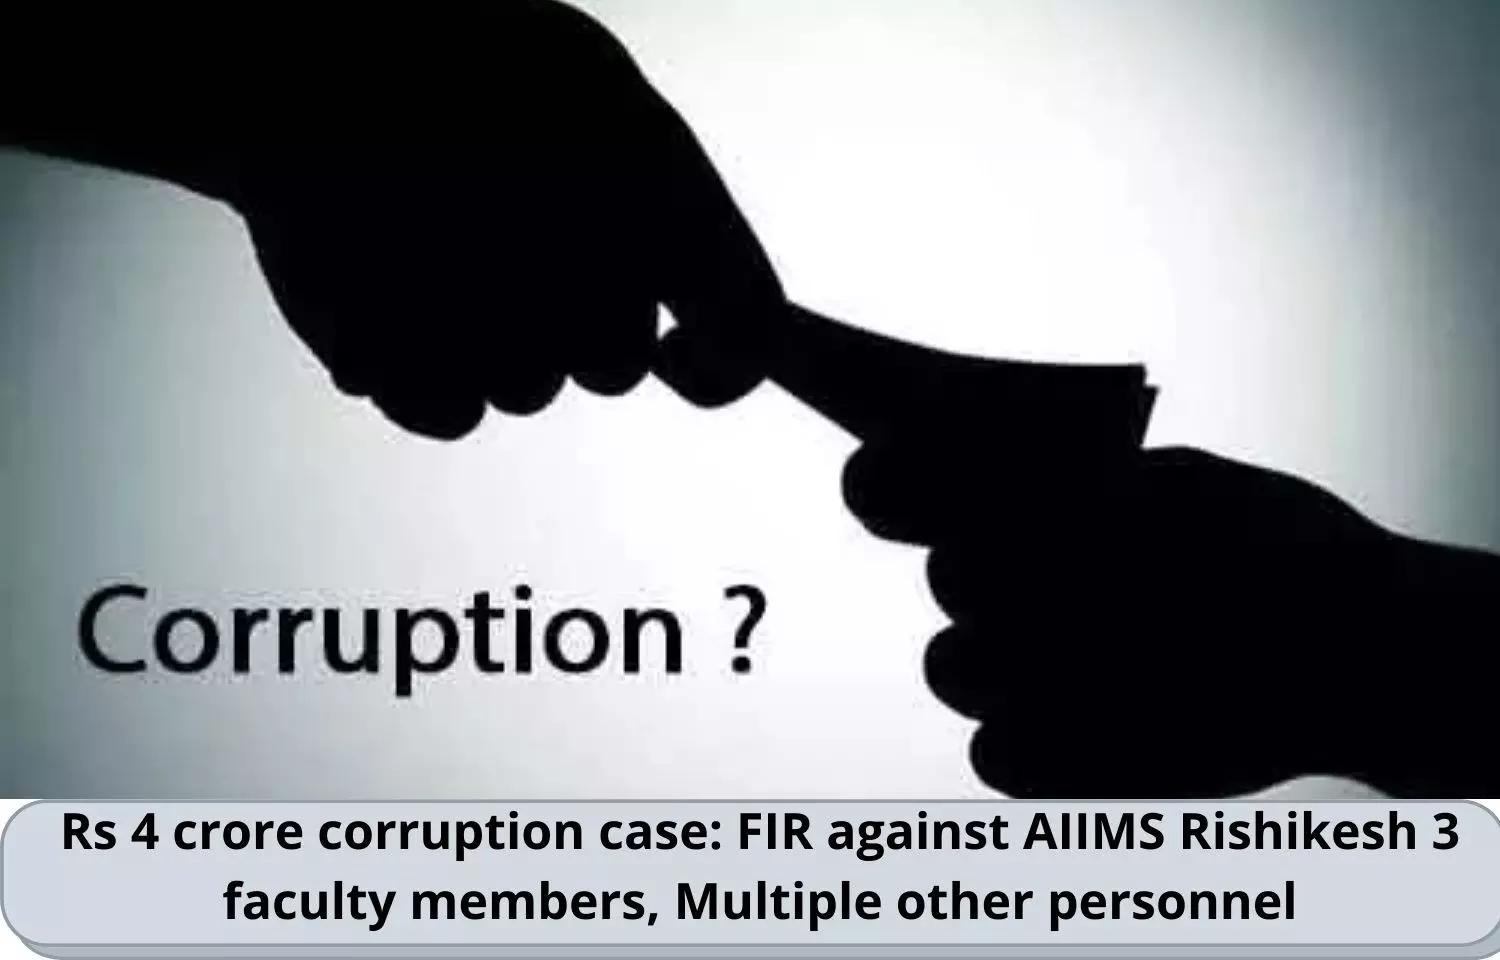 Rs 4 crore corruption case: FIR against AIIMS Rishikesh 3 faculty members, Multiple other personnel